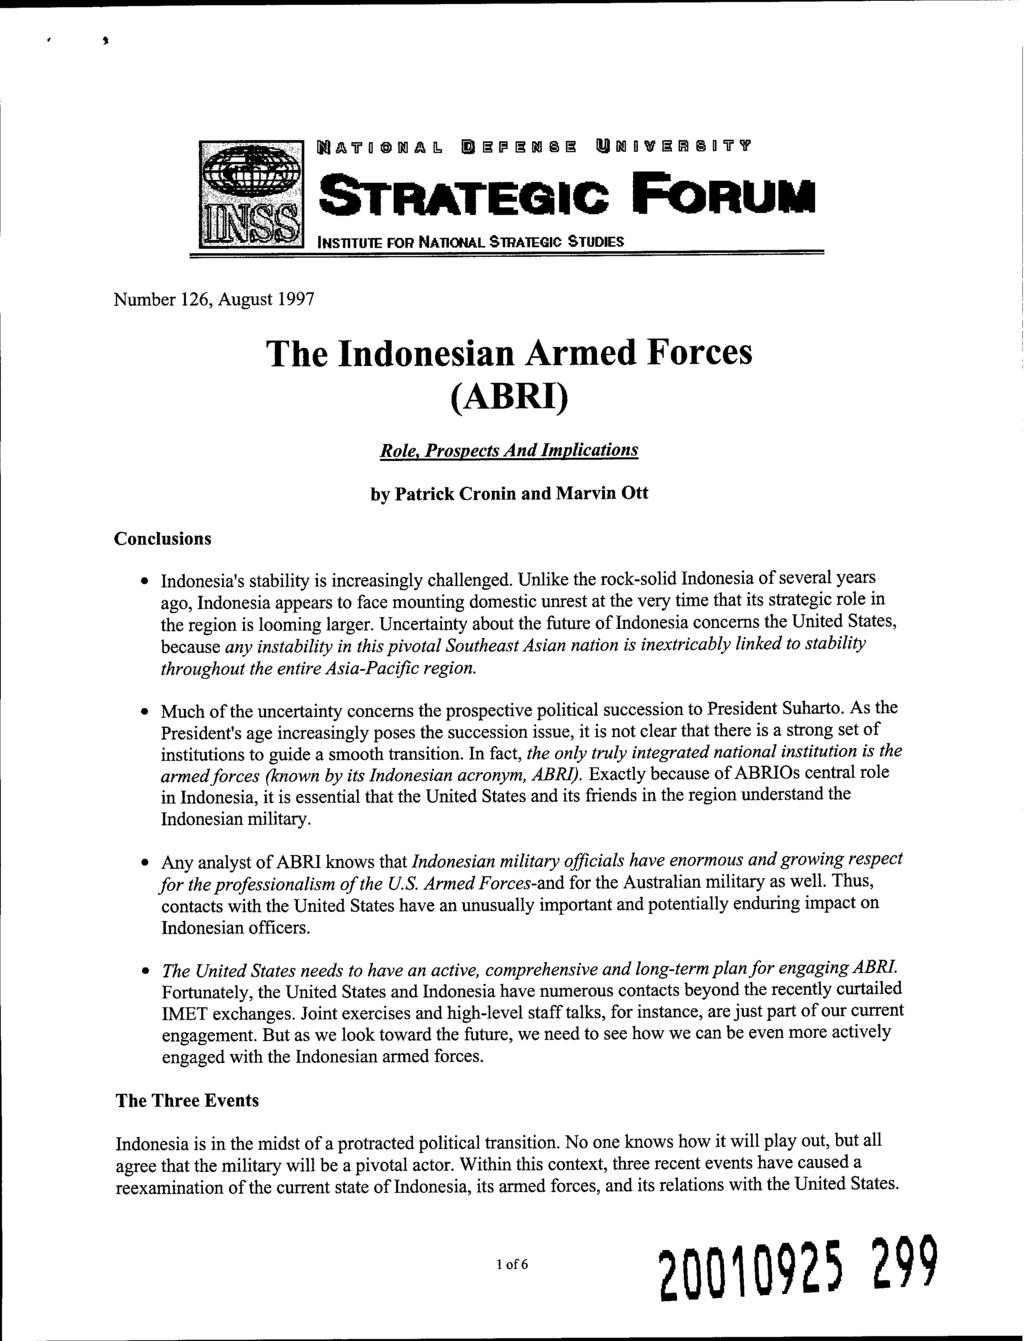 M & T 0 CS Ä Q= g P S Bfl S Qj) M D W I ß D "ff V STRATEGIC FORUM INSTITUTE FOR NATIONAL STRATEGIC STUDIES Number 126, August 1997 Conclusions The Indonesian Armed Forces (ABRI) Role.